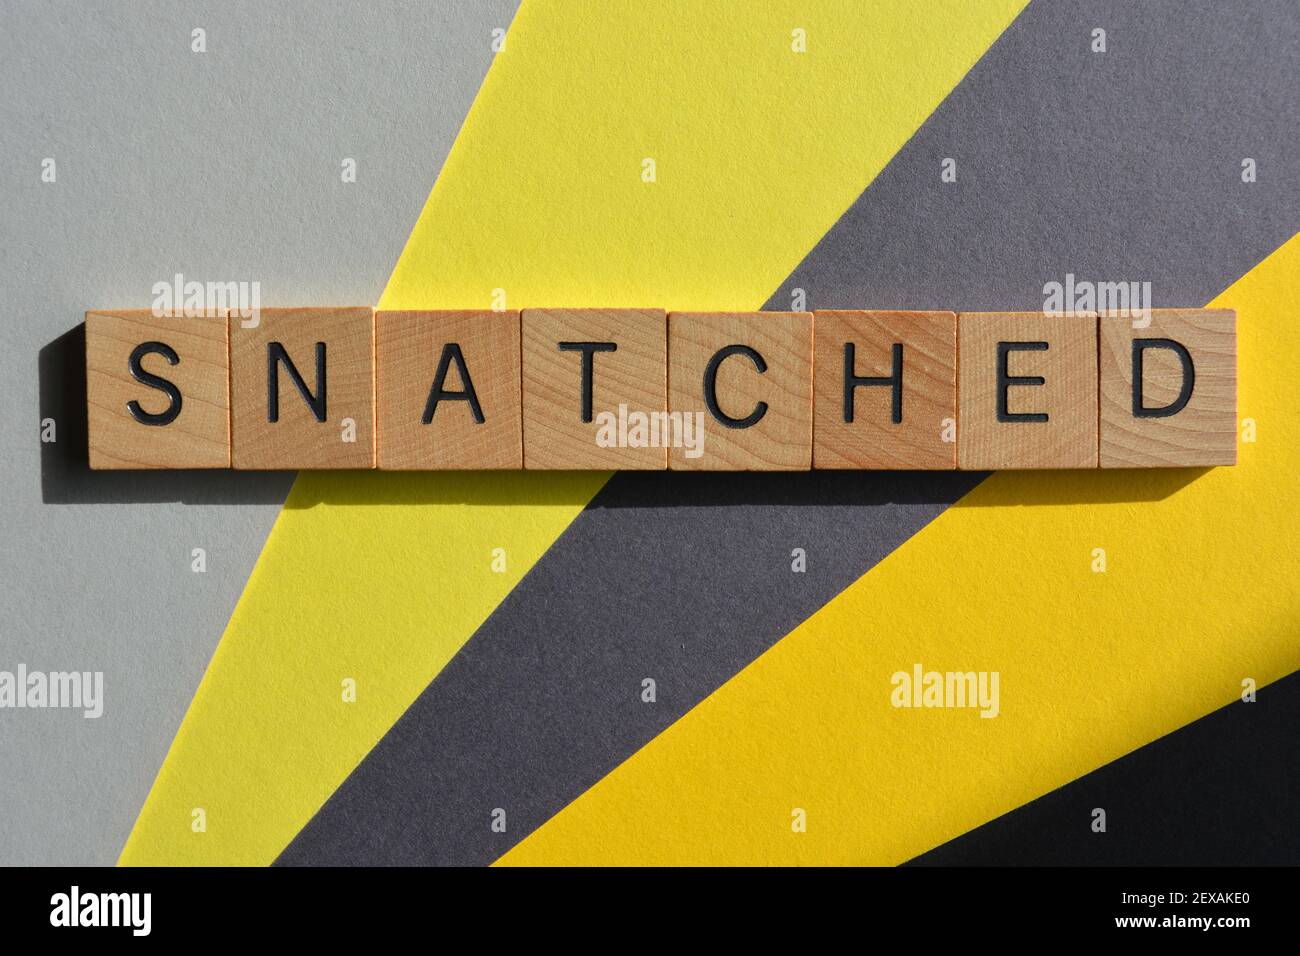 Snatched, slang word in wooden alphabet letters, used as a compliment Stock Photo